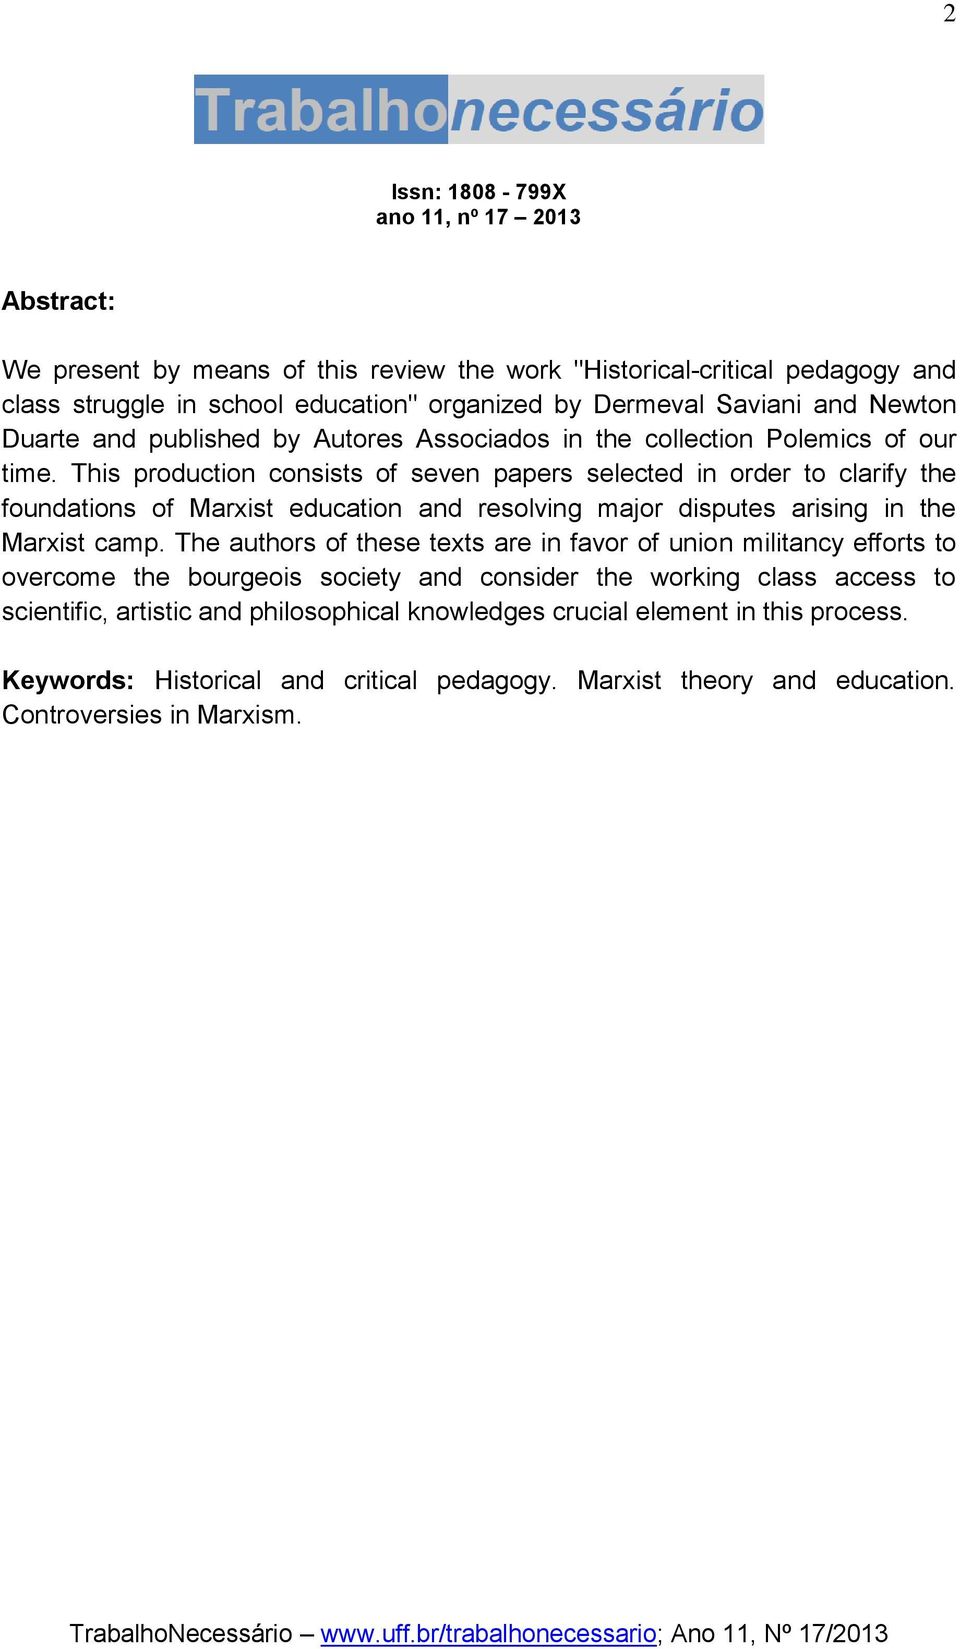 This production consists of seven papers selected in order to clarify the foundations of Marxist education and resolving major disputes arising in the Marxist camp.